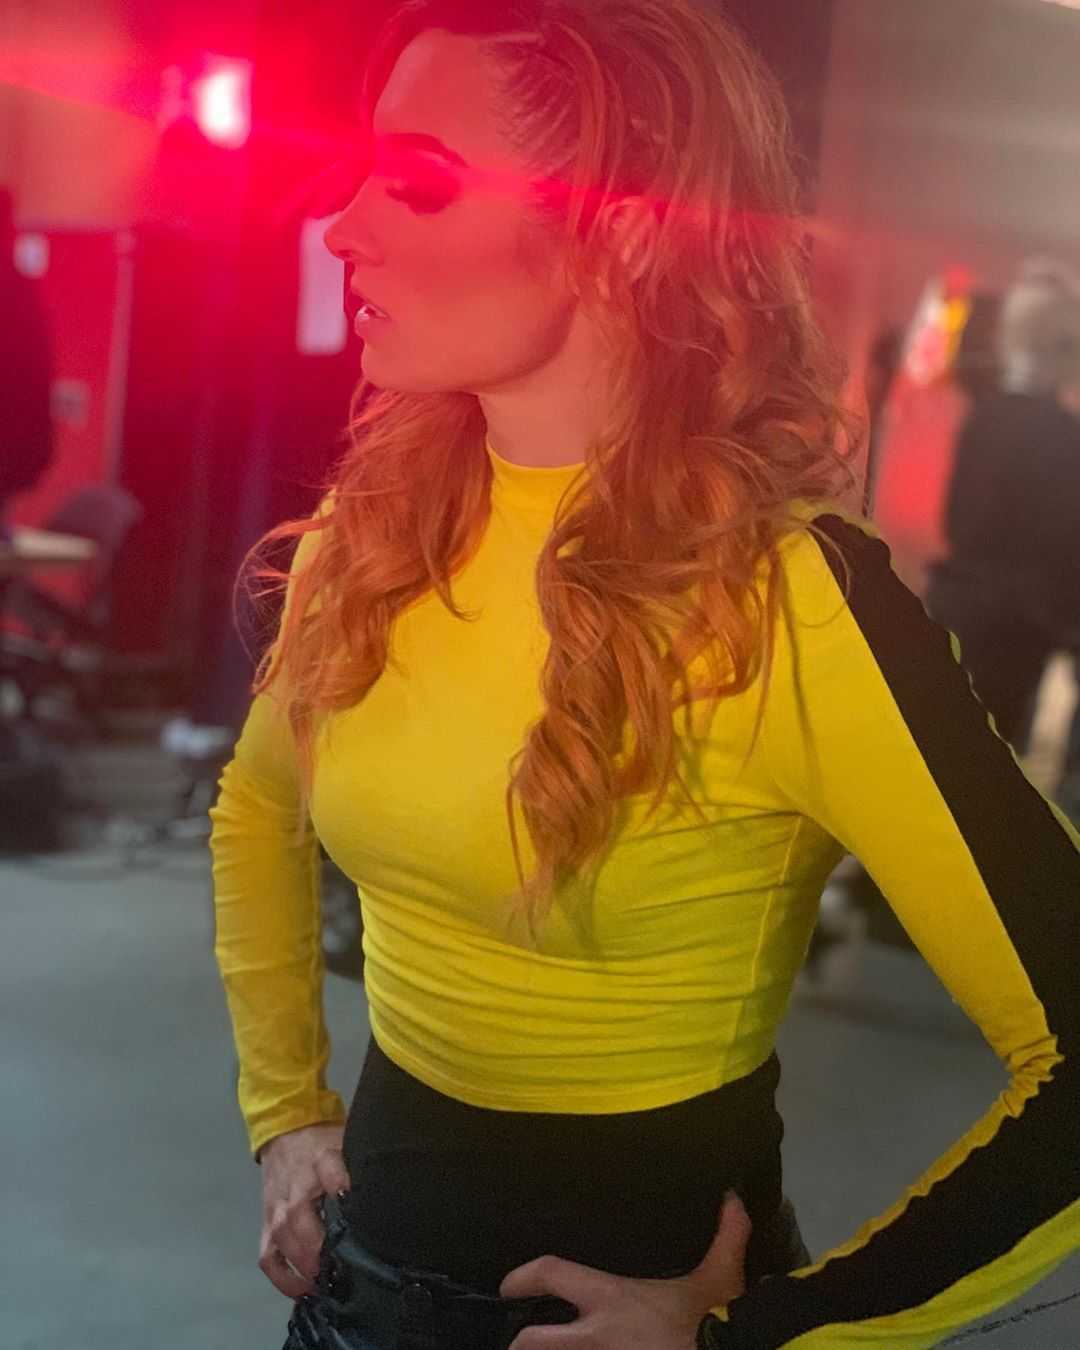 70+ Hot And Sexy Pictures of Becky Lynch – WWE Diva Will Sizzle You Up 32